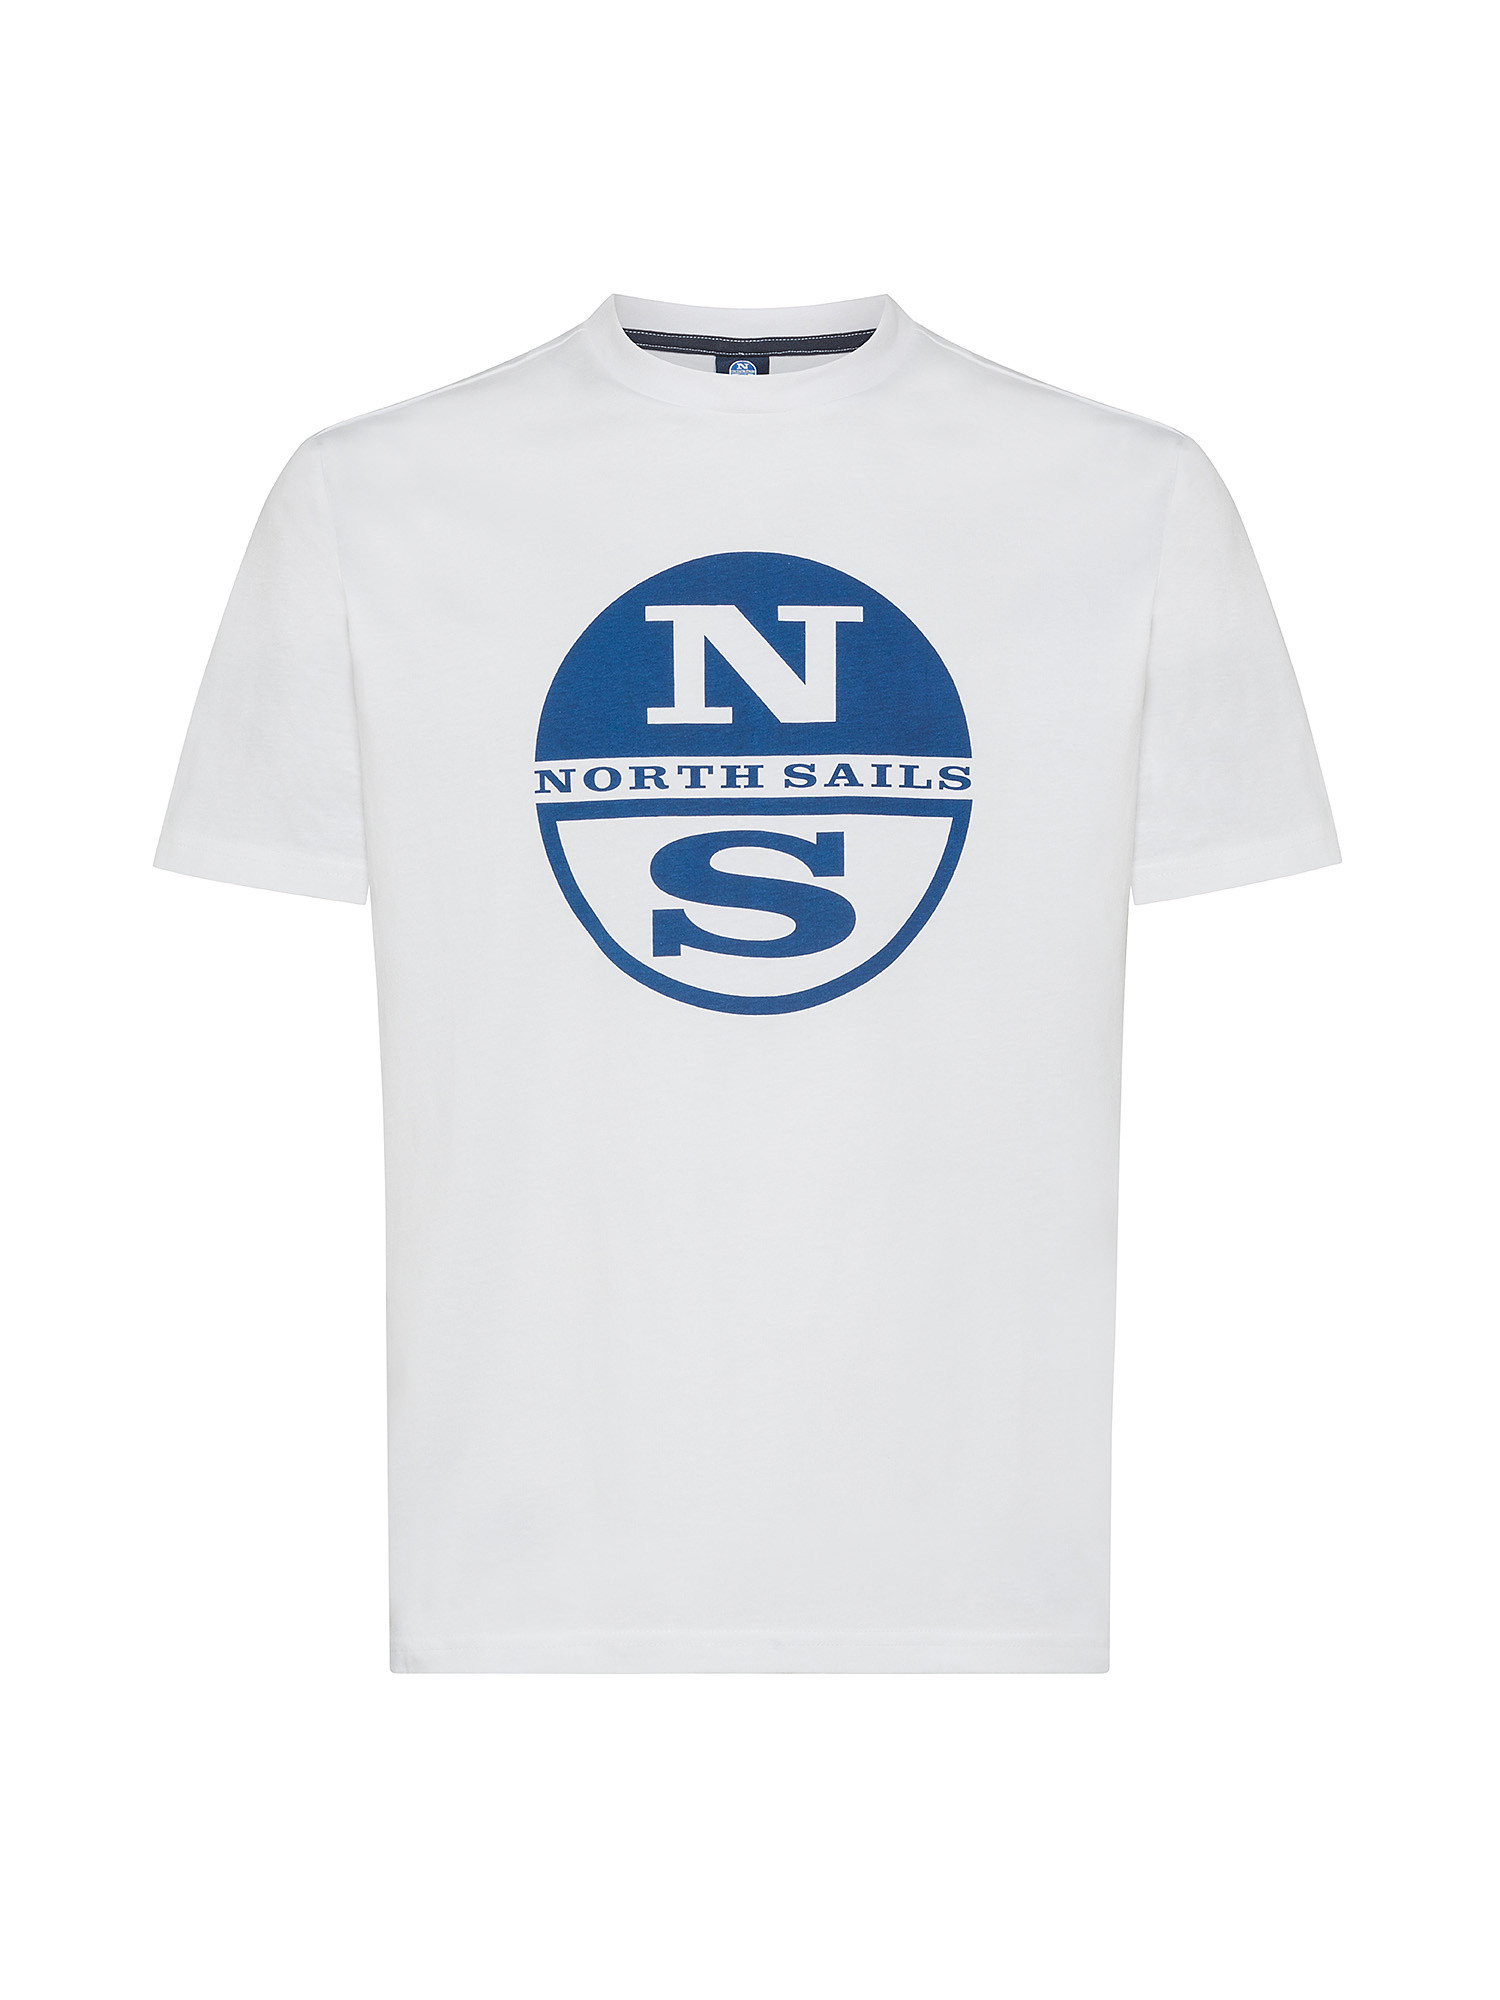 North sails - Organic cotton jersey T-shirt with printed maxi logo, White, large image number 0